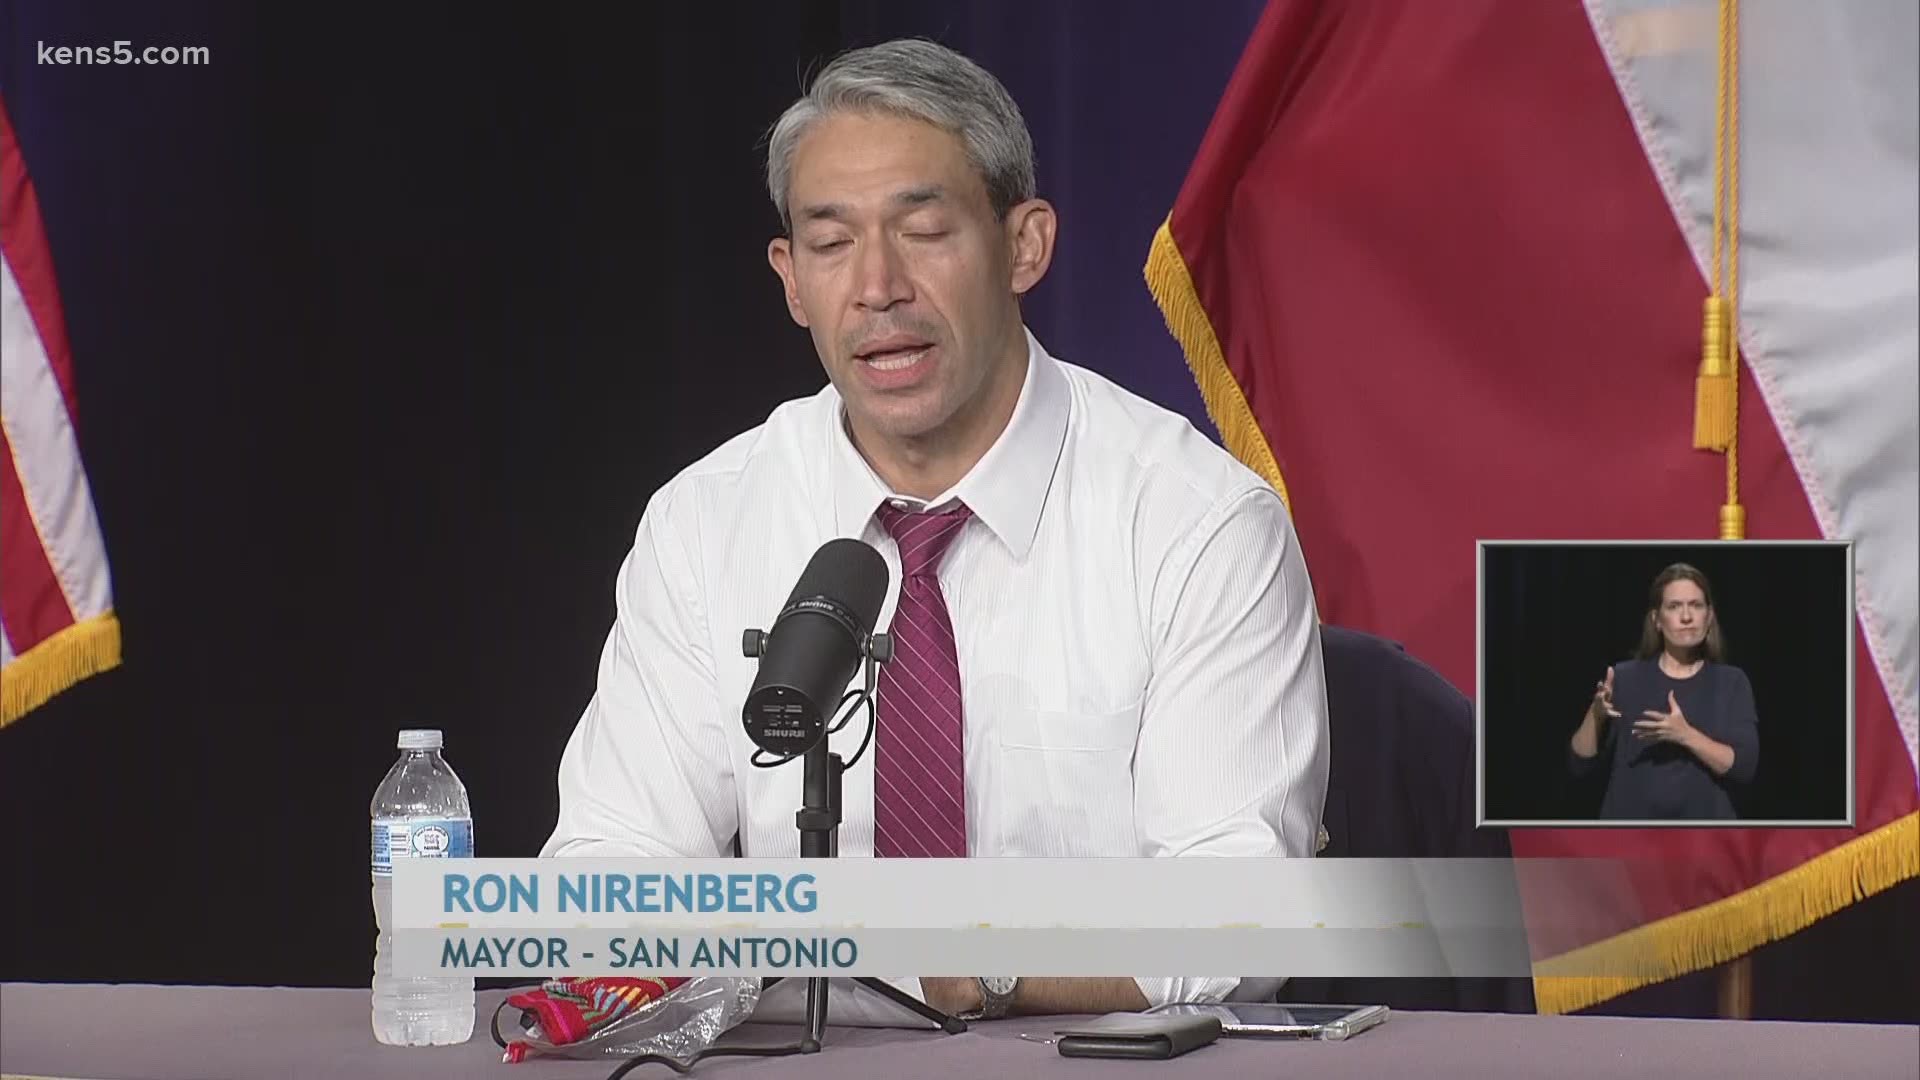 Mayor Nirenberg reported an additional 53 cases of coronavirus in Bexar County and one new death, bringing the local death toll to 72.